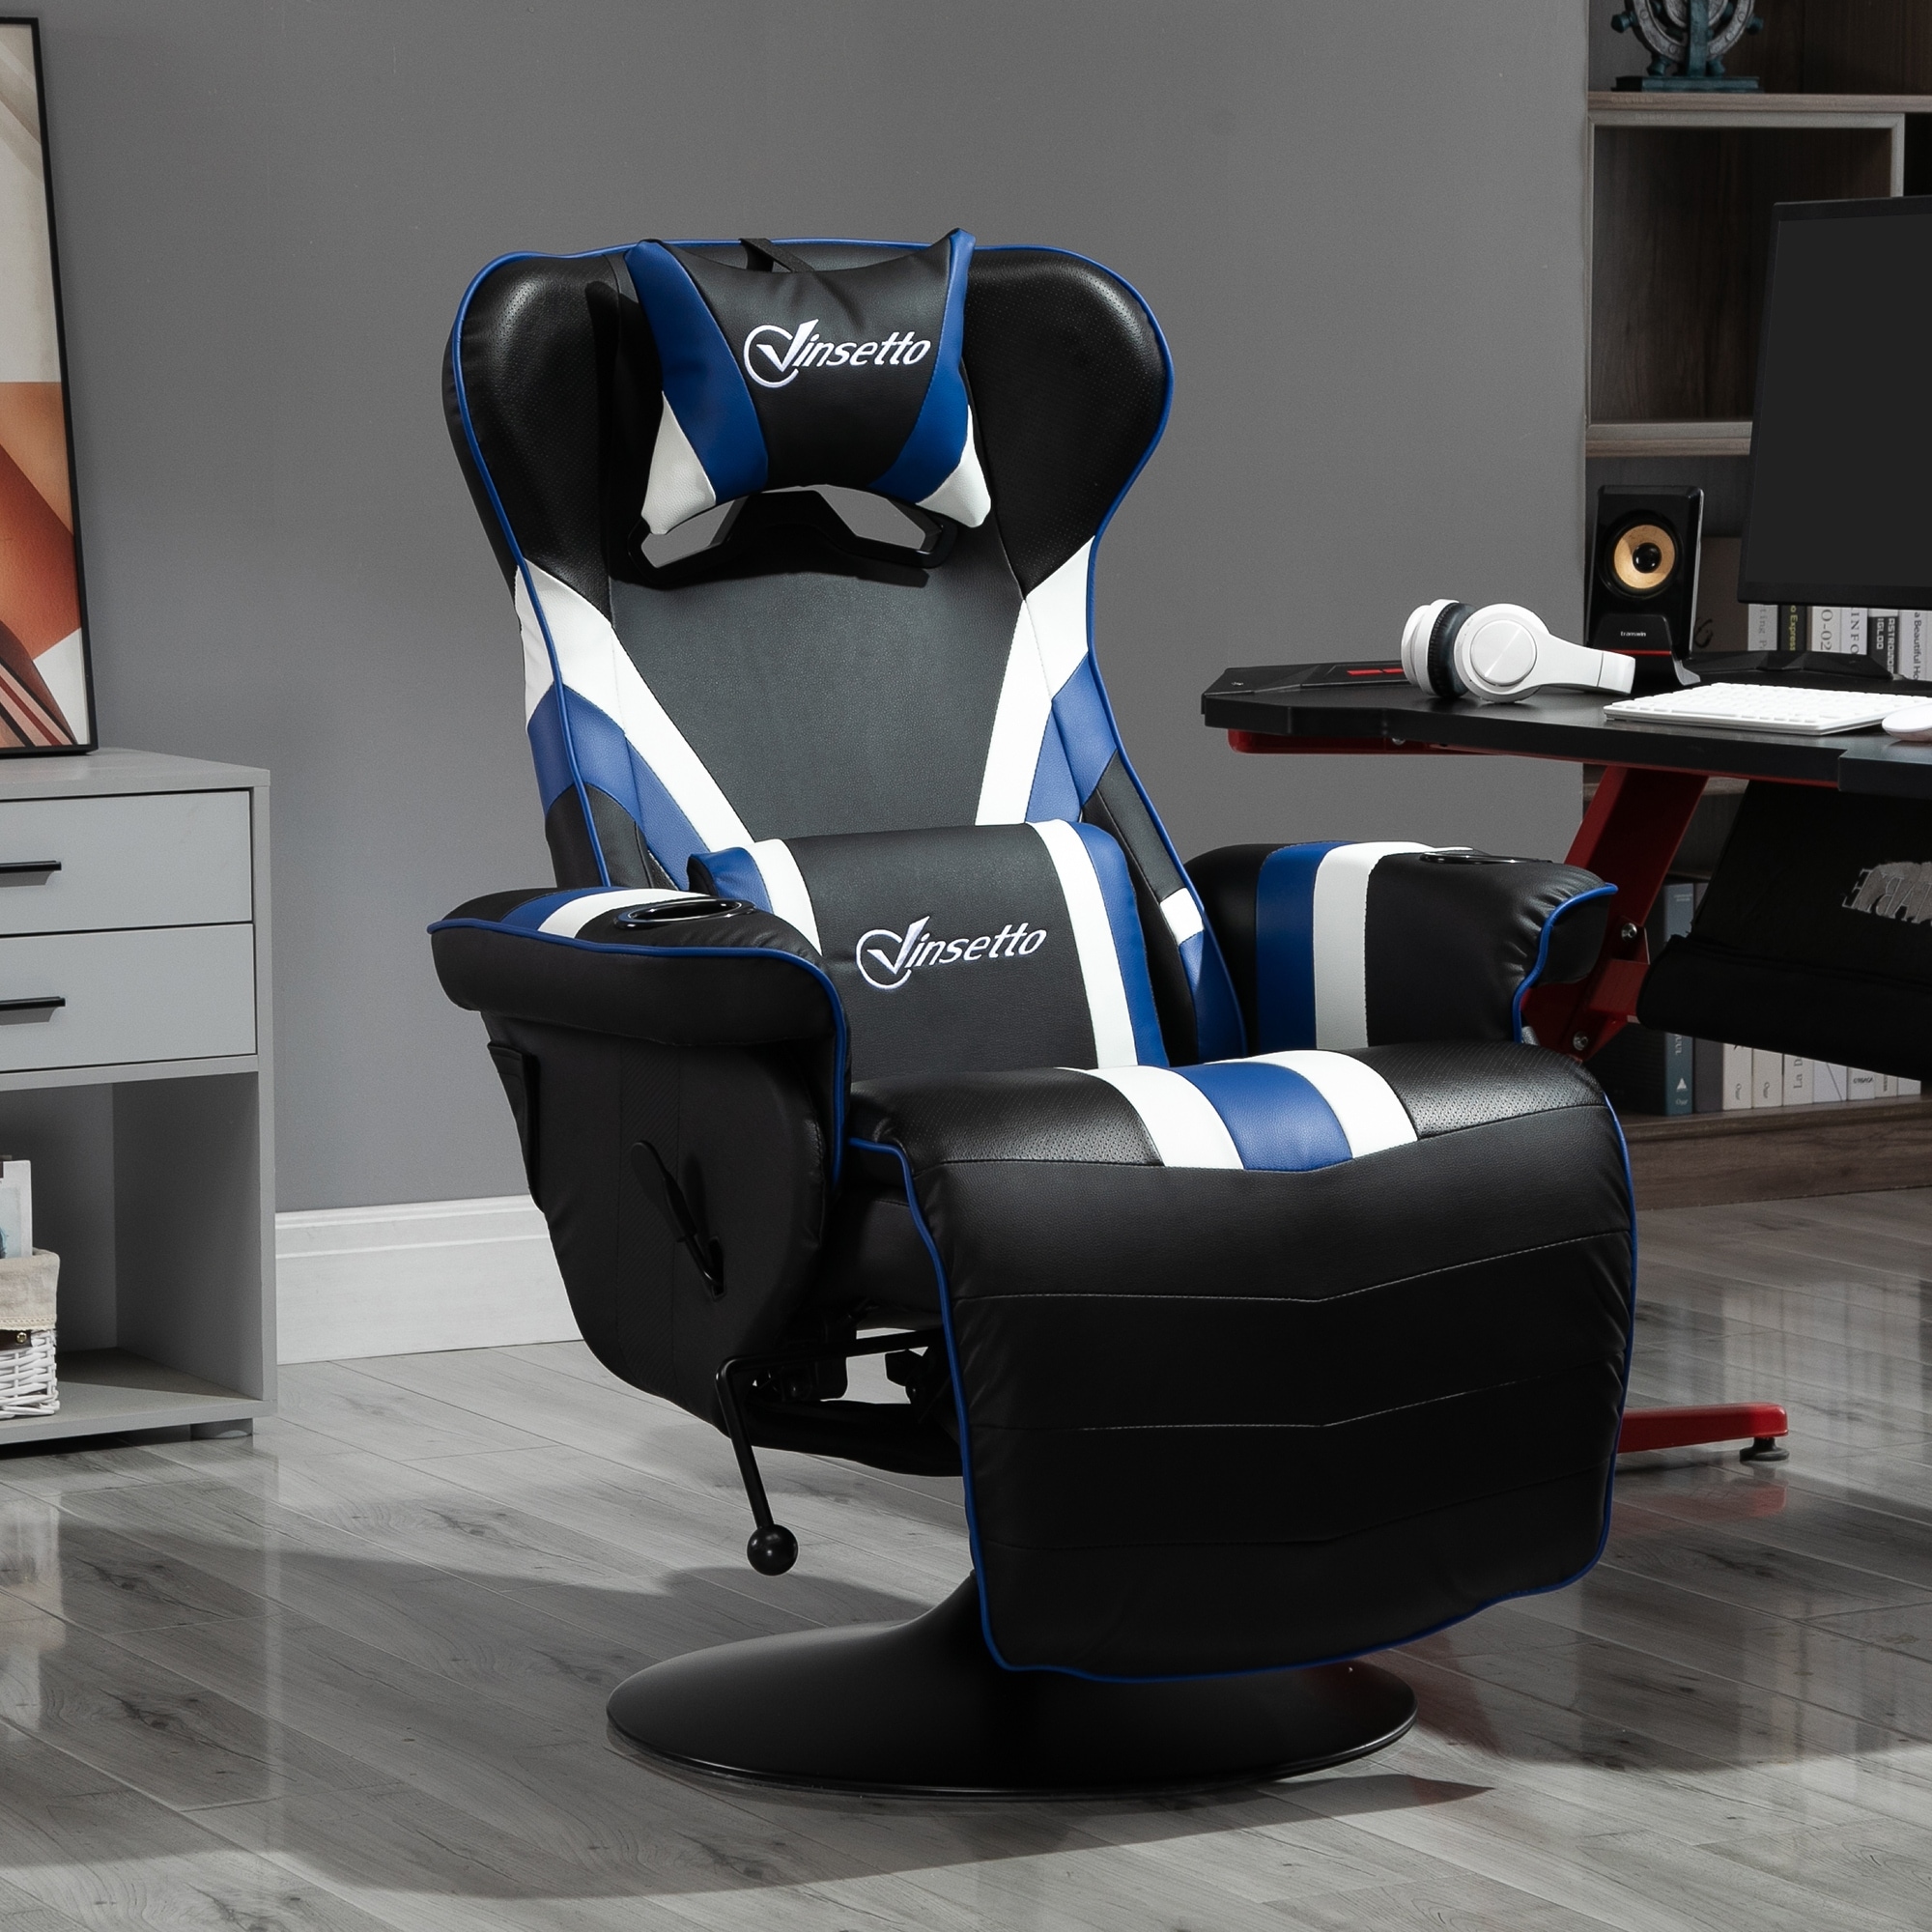 https://ak1.ostkcdn.com/images/products/is/images/direct/f2c87c8d88e1a61437e08c3ae1e8c3725aefbcf6/Vinsetto-Race-Video-Game-Chair-with-Reclining-Backrest-and-Footrest%2C-Headrest%2C-and-Cup-Holder.jpg